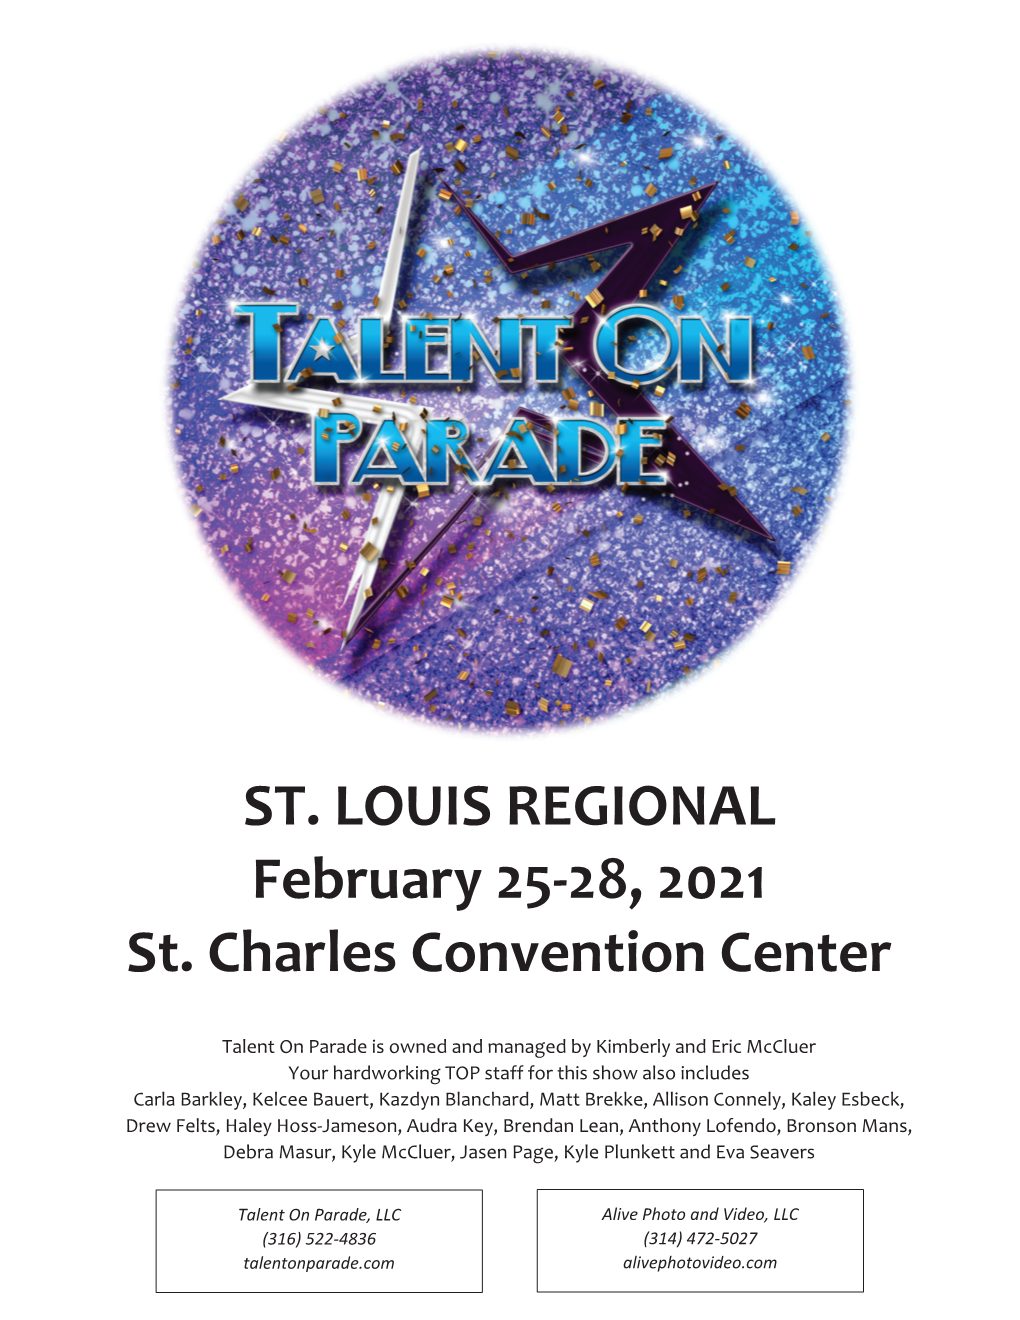 ST. LOUIS REGIONAL February 25-28, 2021 St. Charles Convention